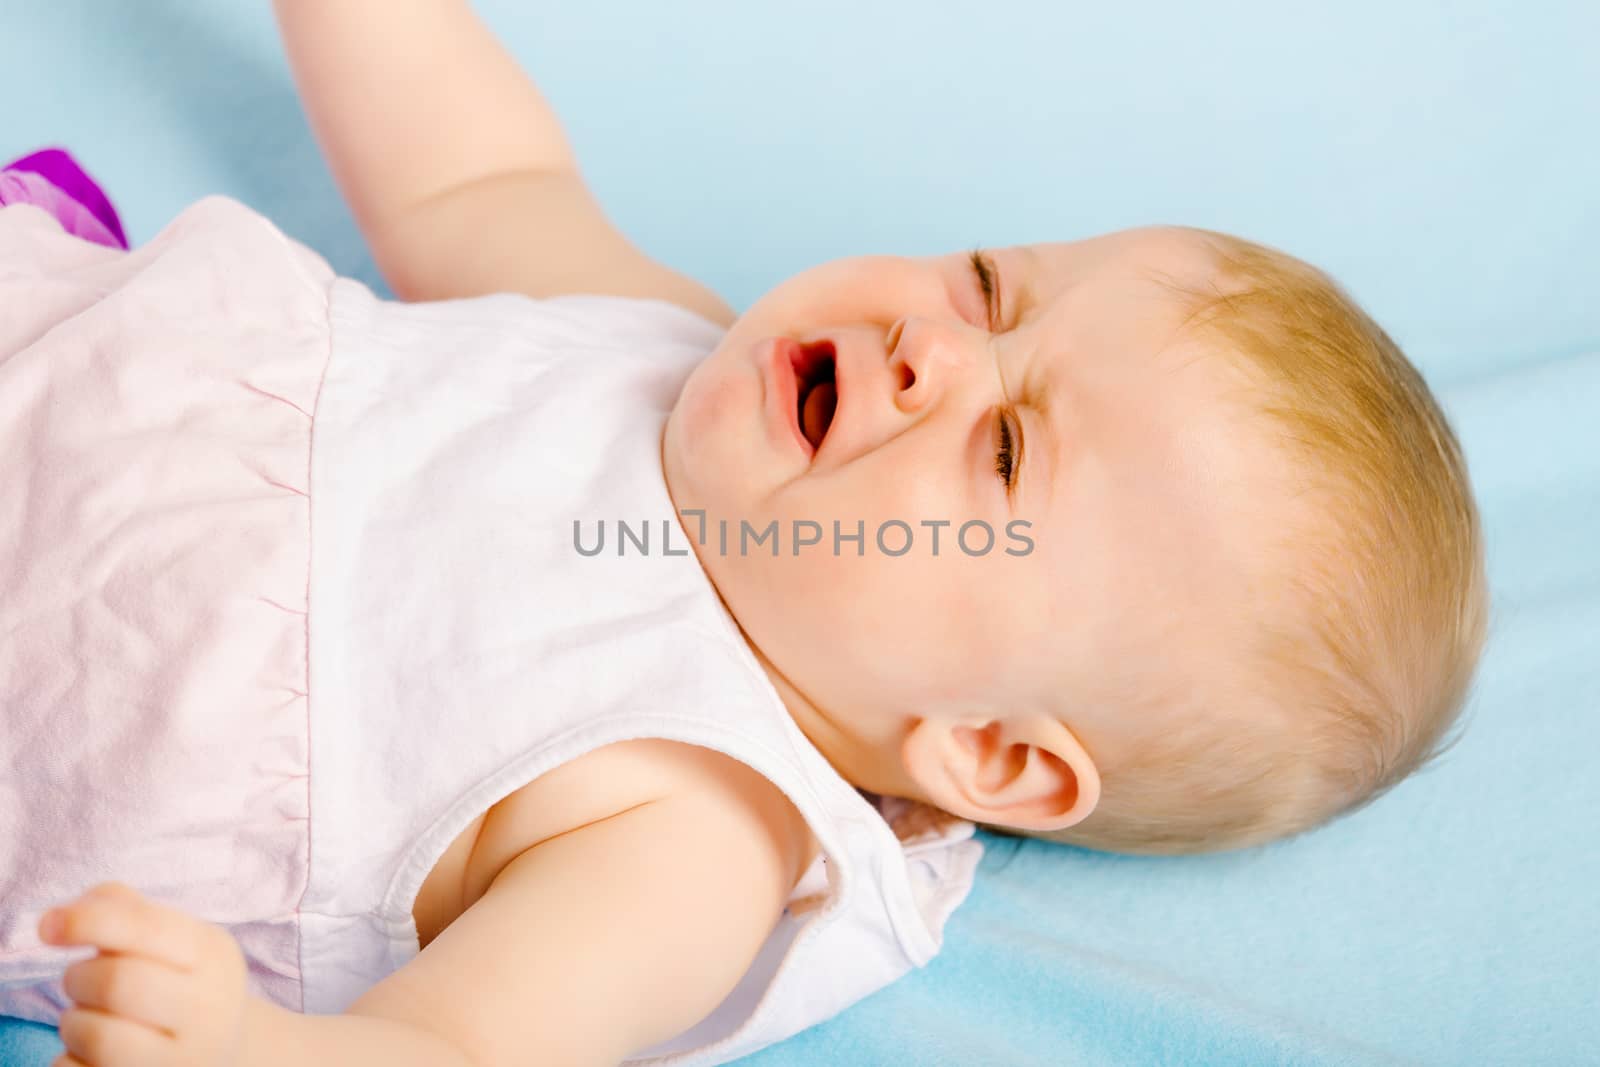 Crying baby lying on a blue plaid